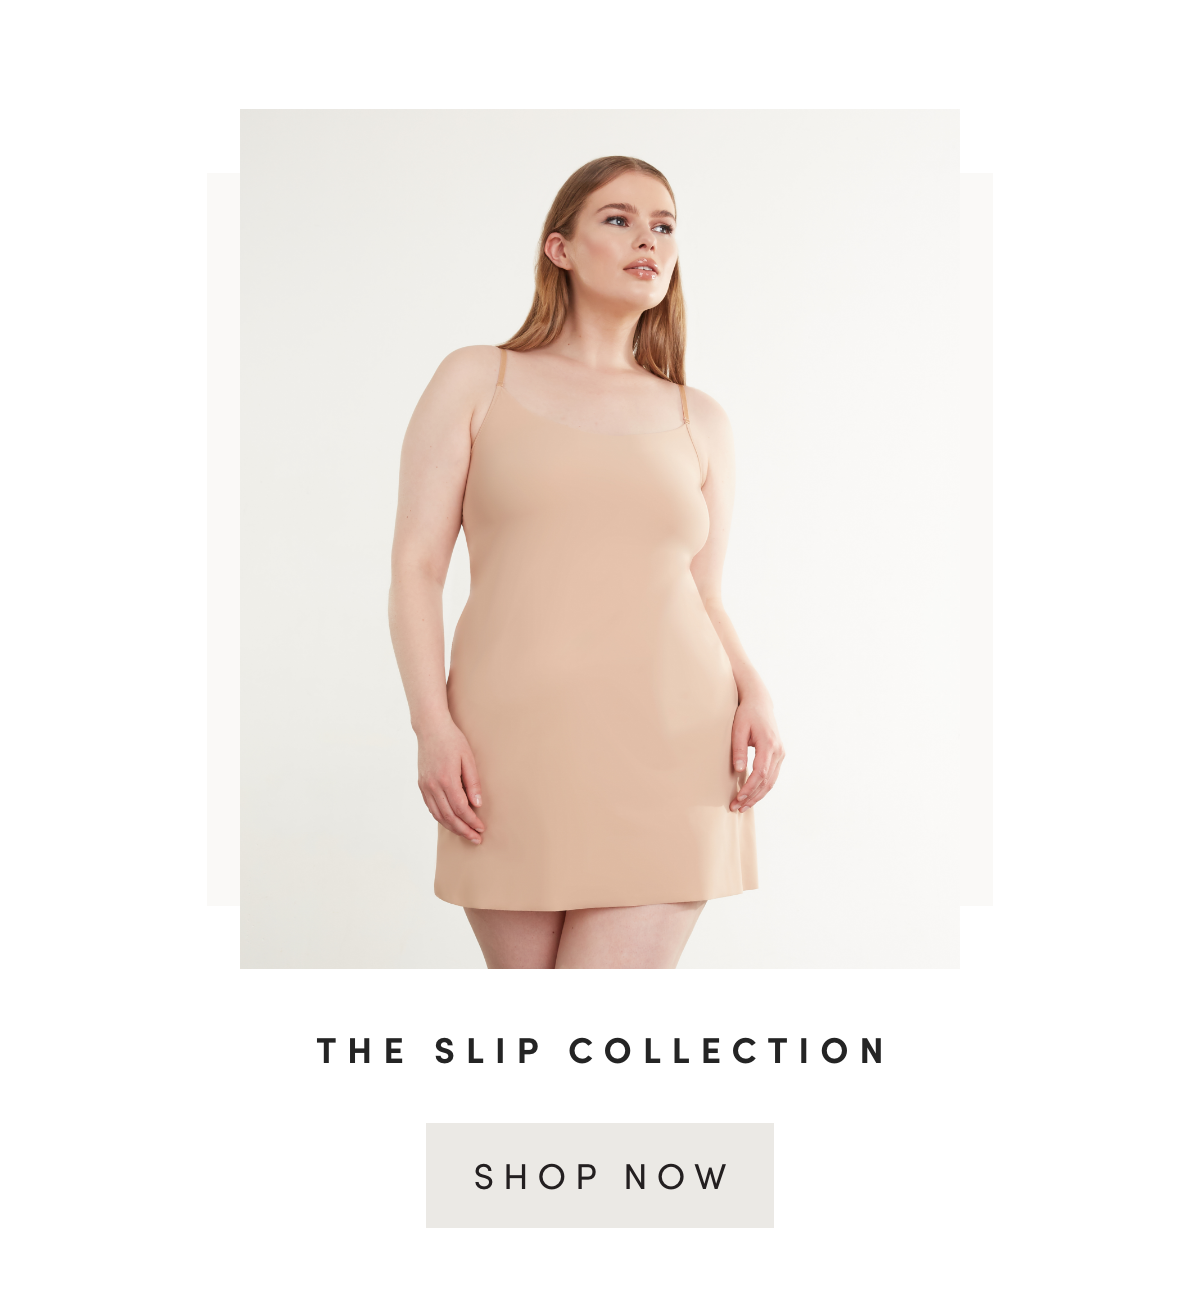 The Slip Collection